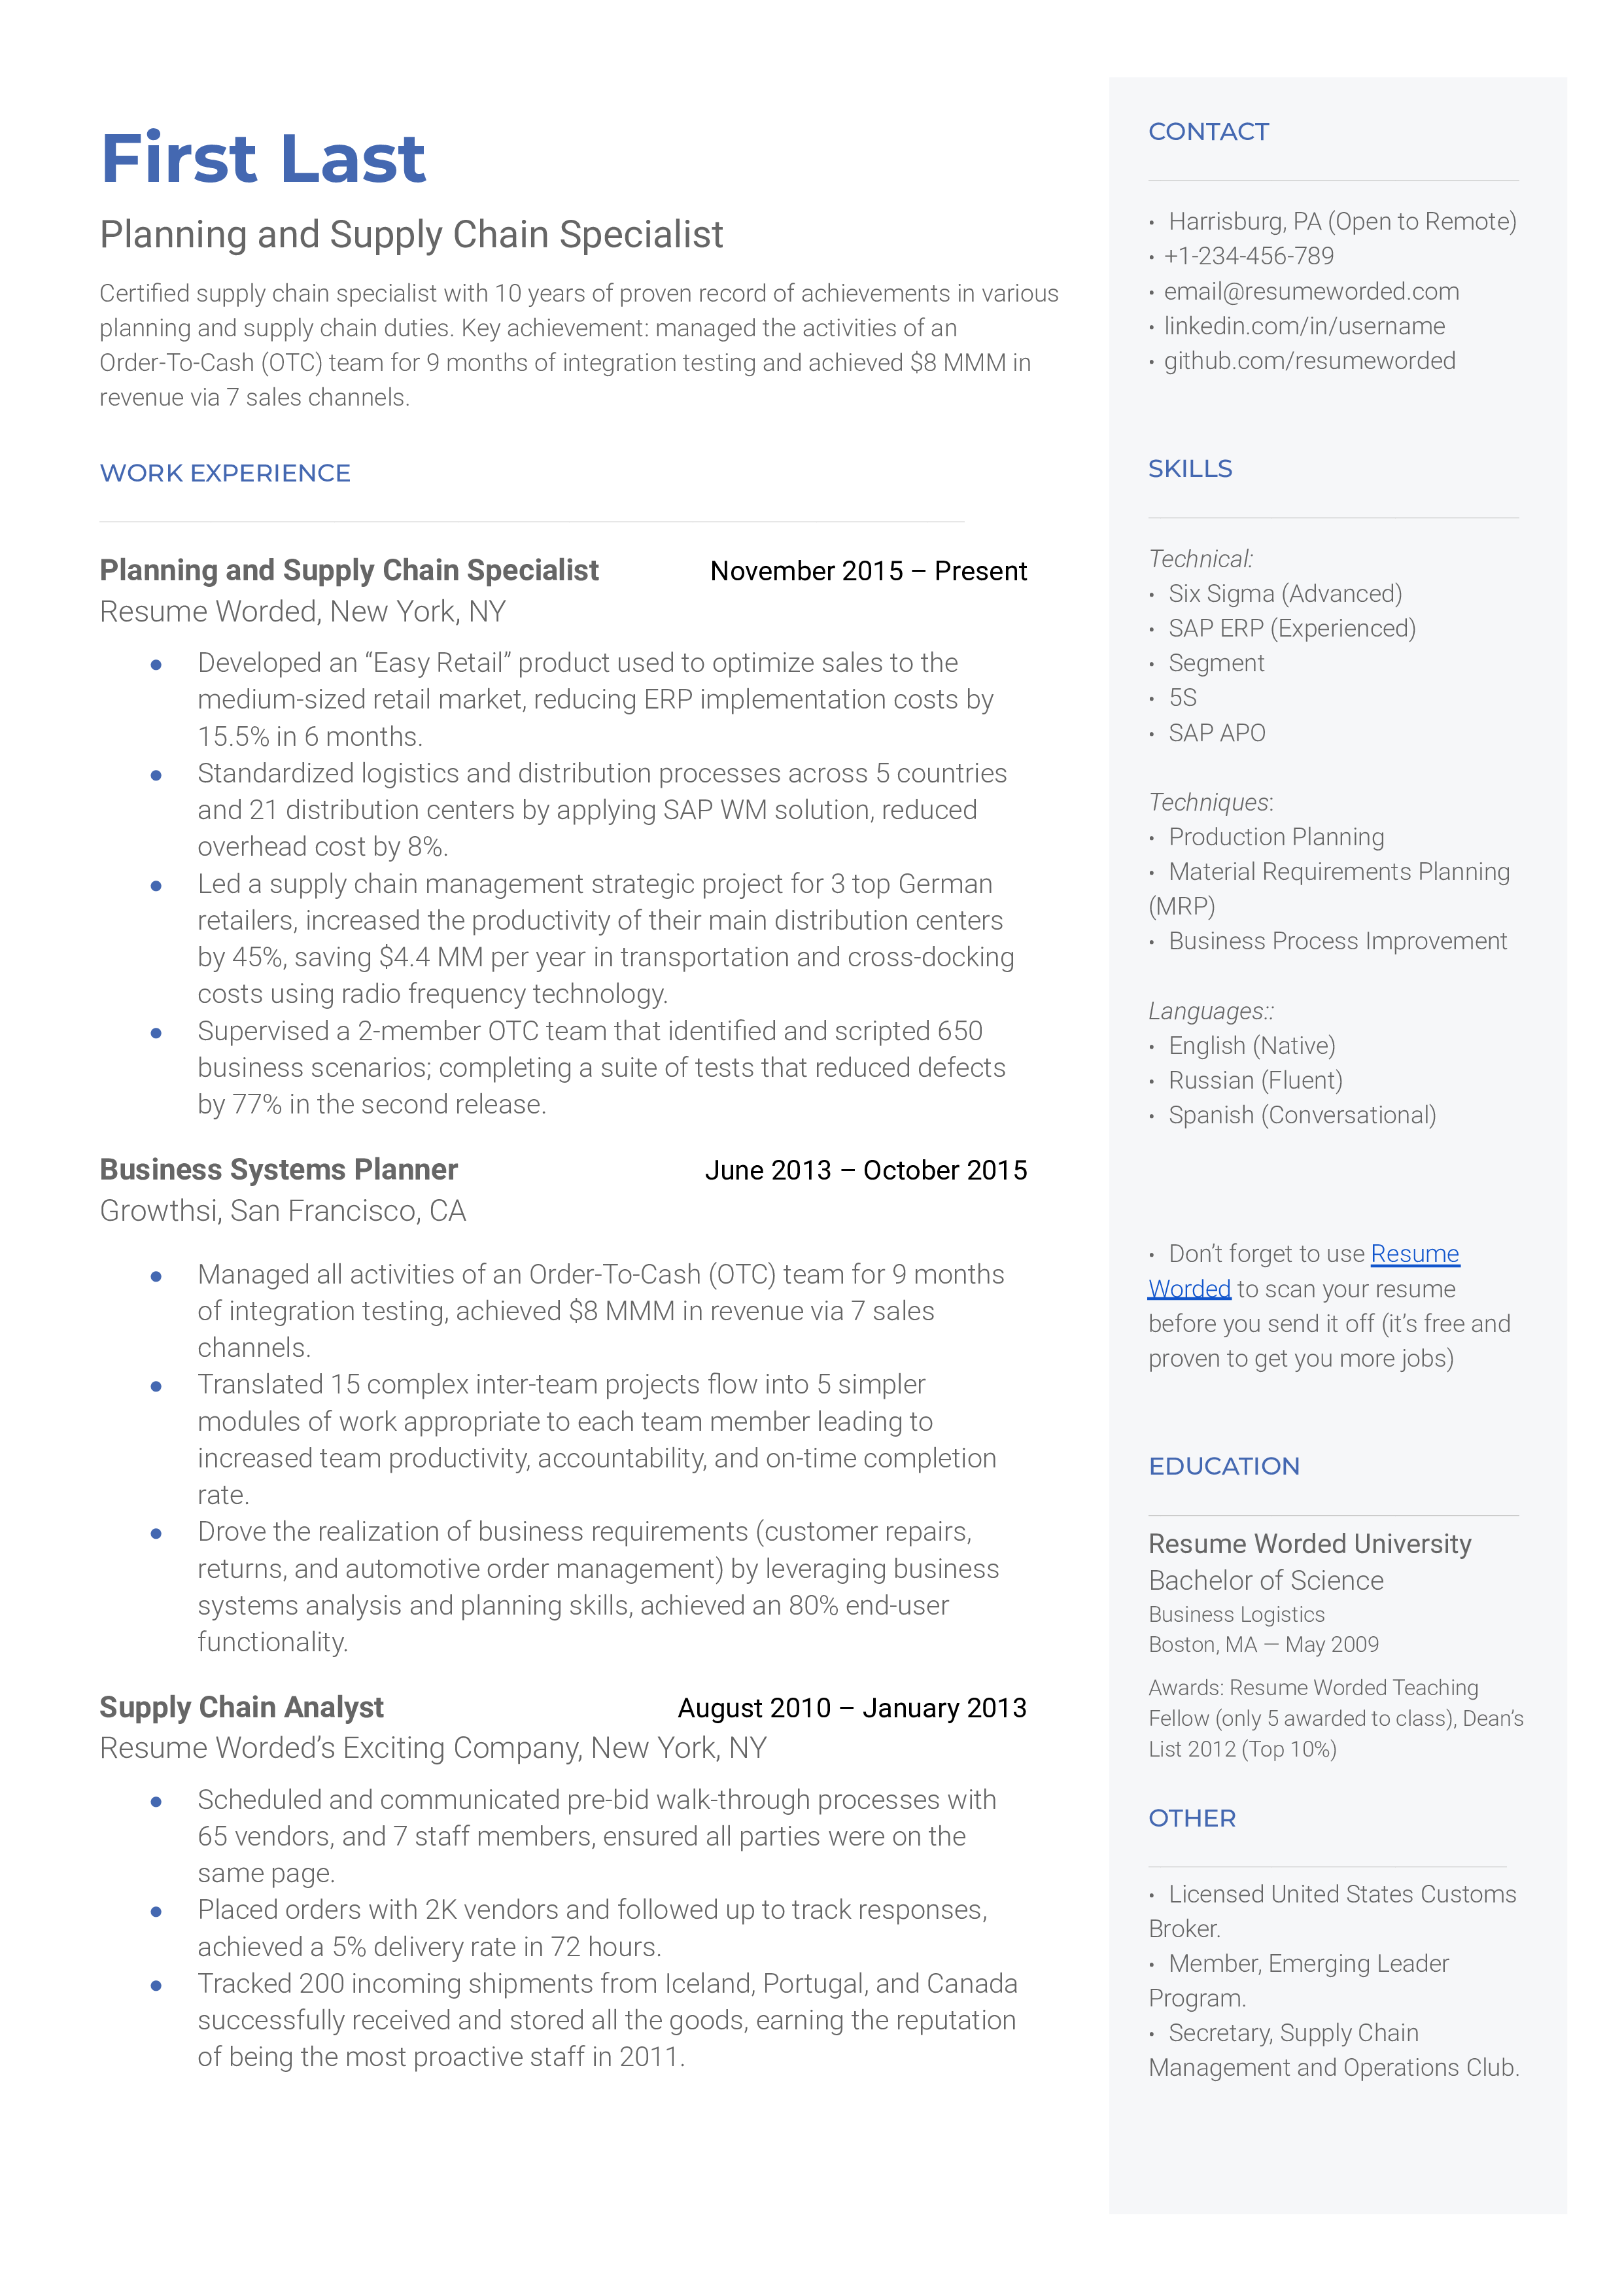 Planning and Supply Chain Specialist Resume Sample